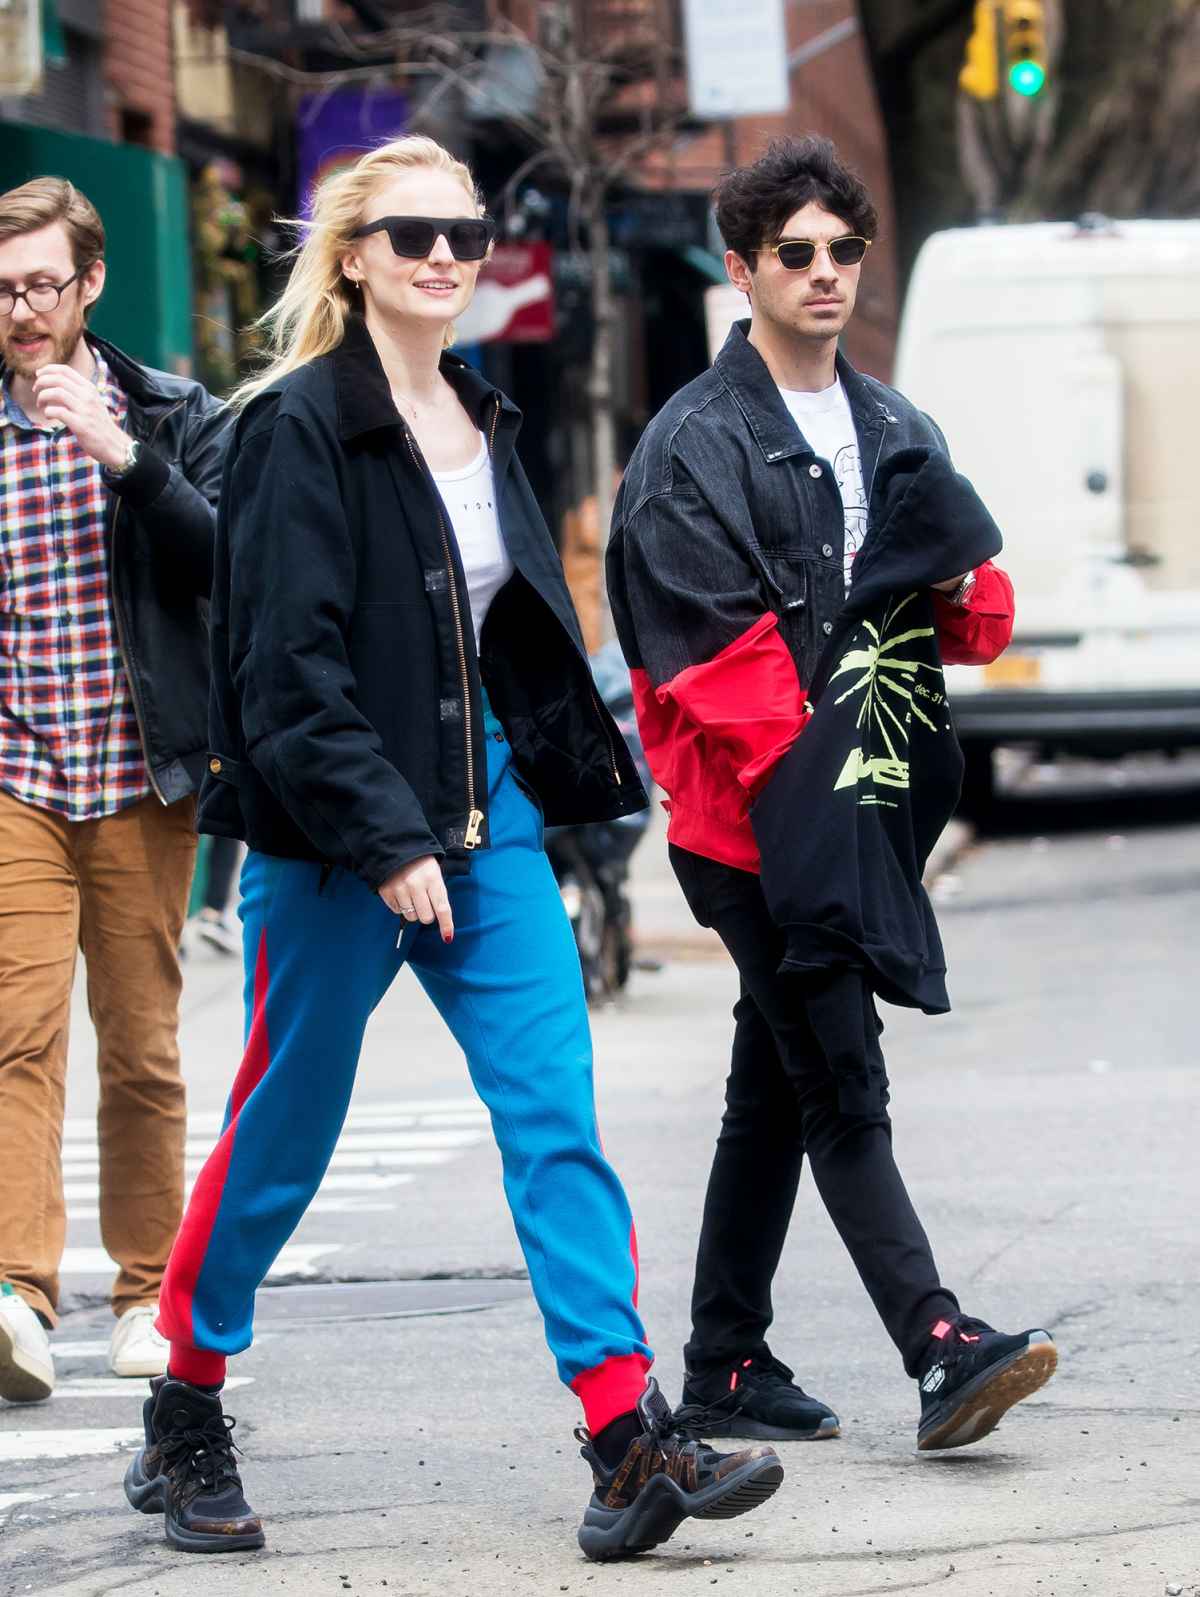 Sophie Turner Is Radiant in Fiery Red Look as She Fangirls at Joe Jonas'  Walk of Fame Ceremony